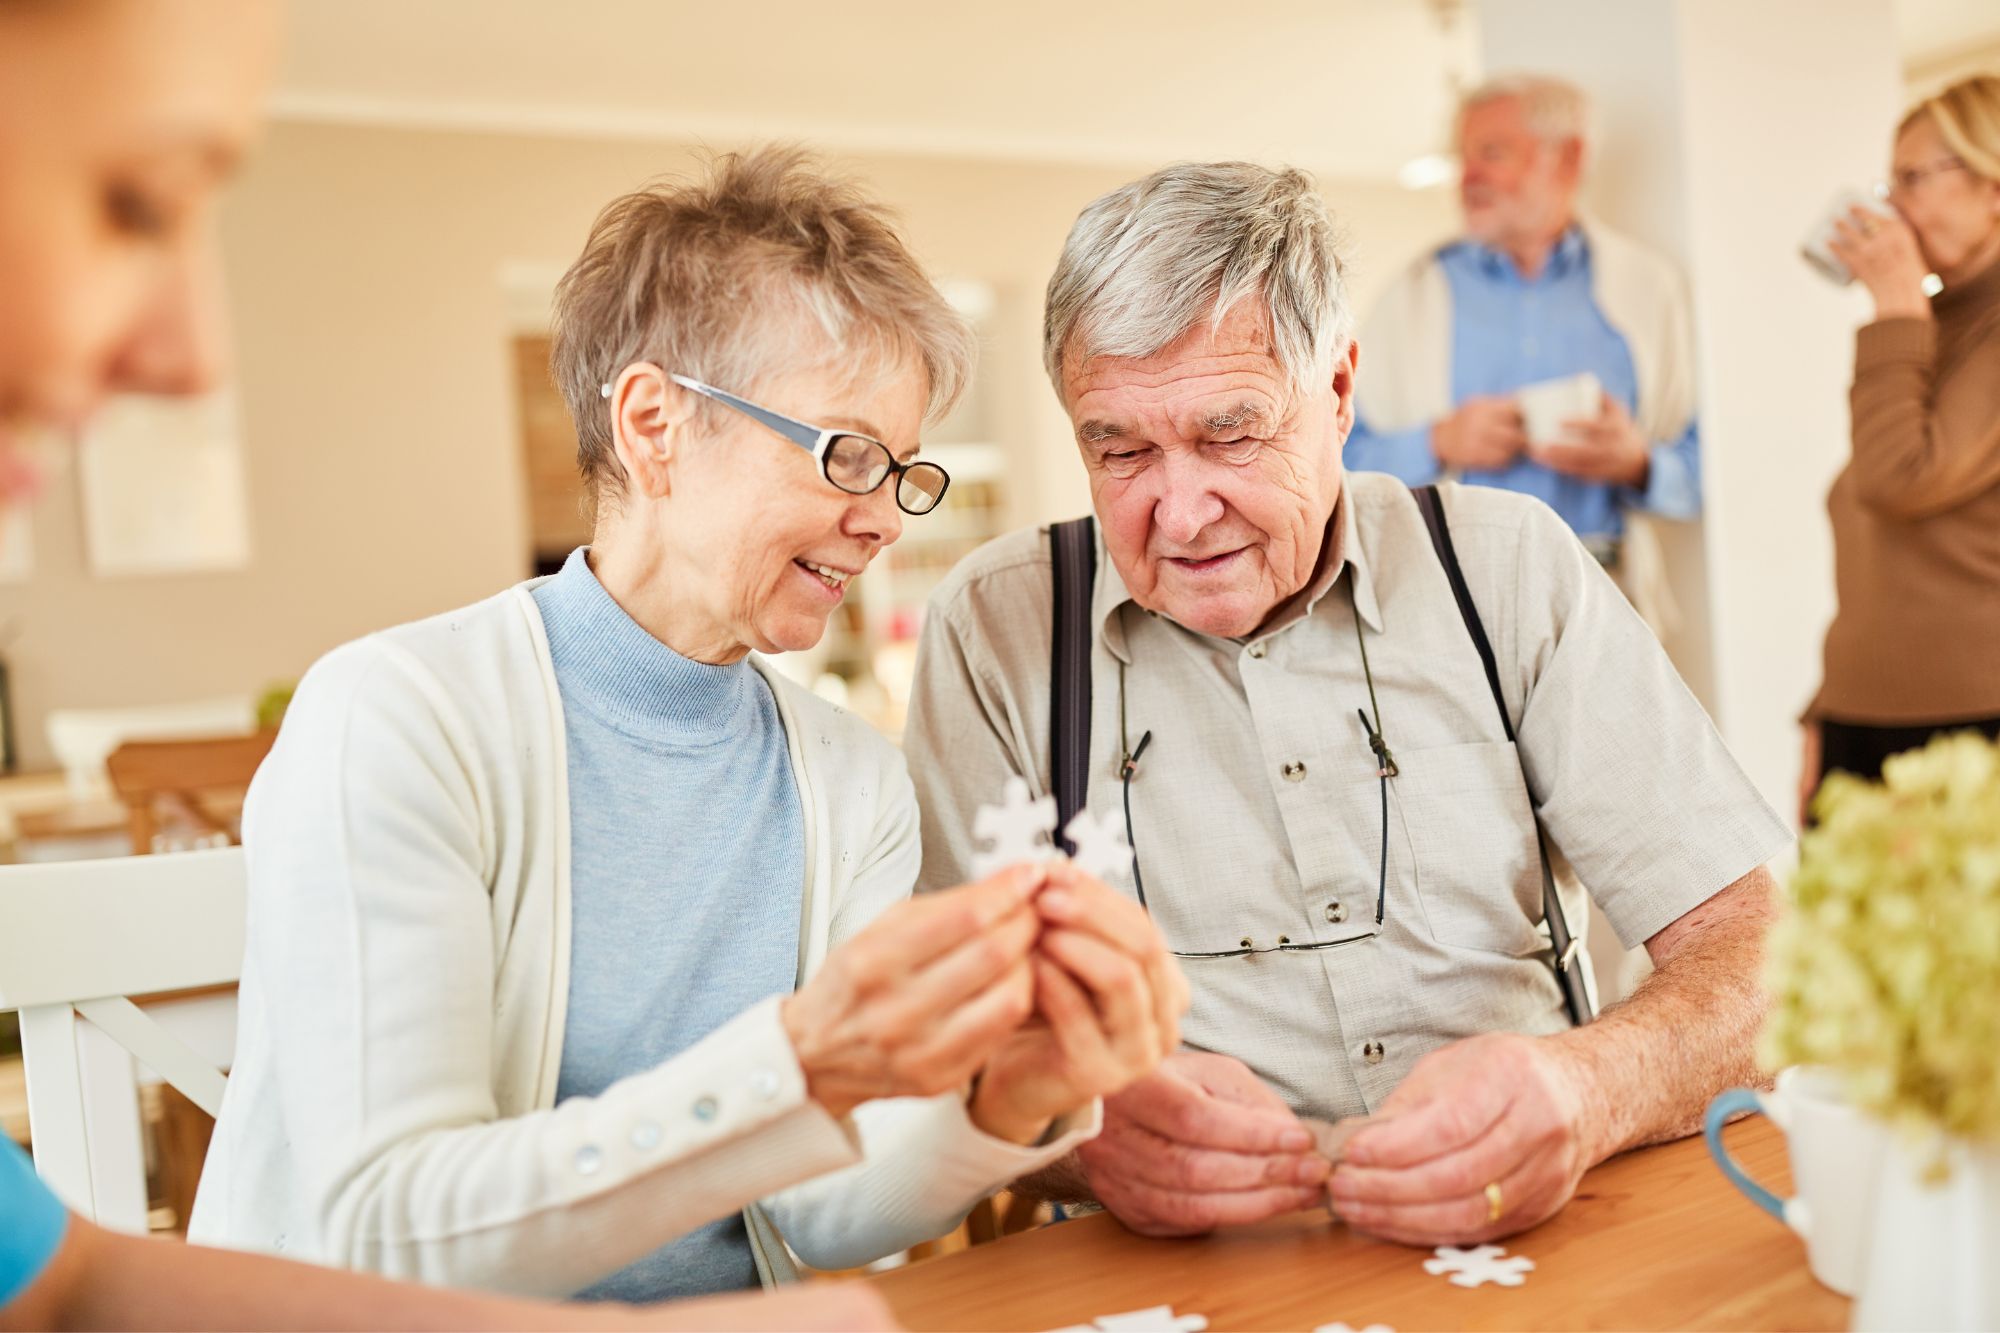 senior couple with dementia playing puzzle in an assisted living community